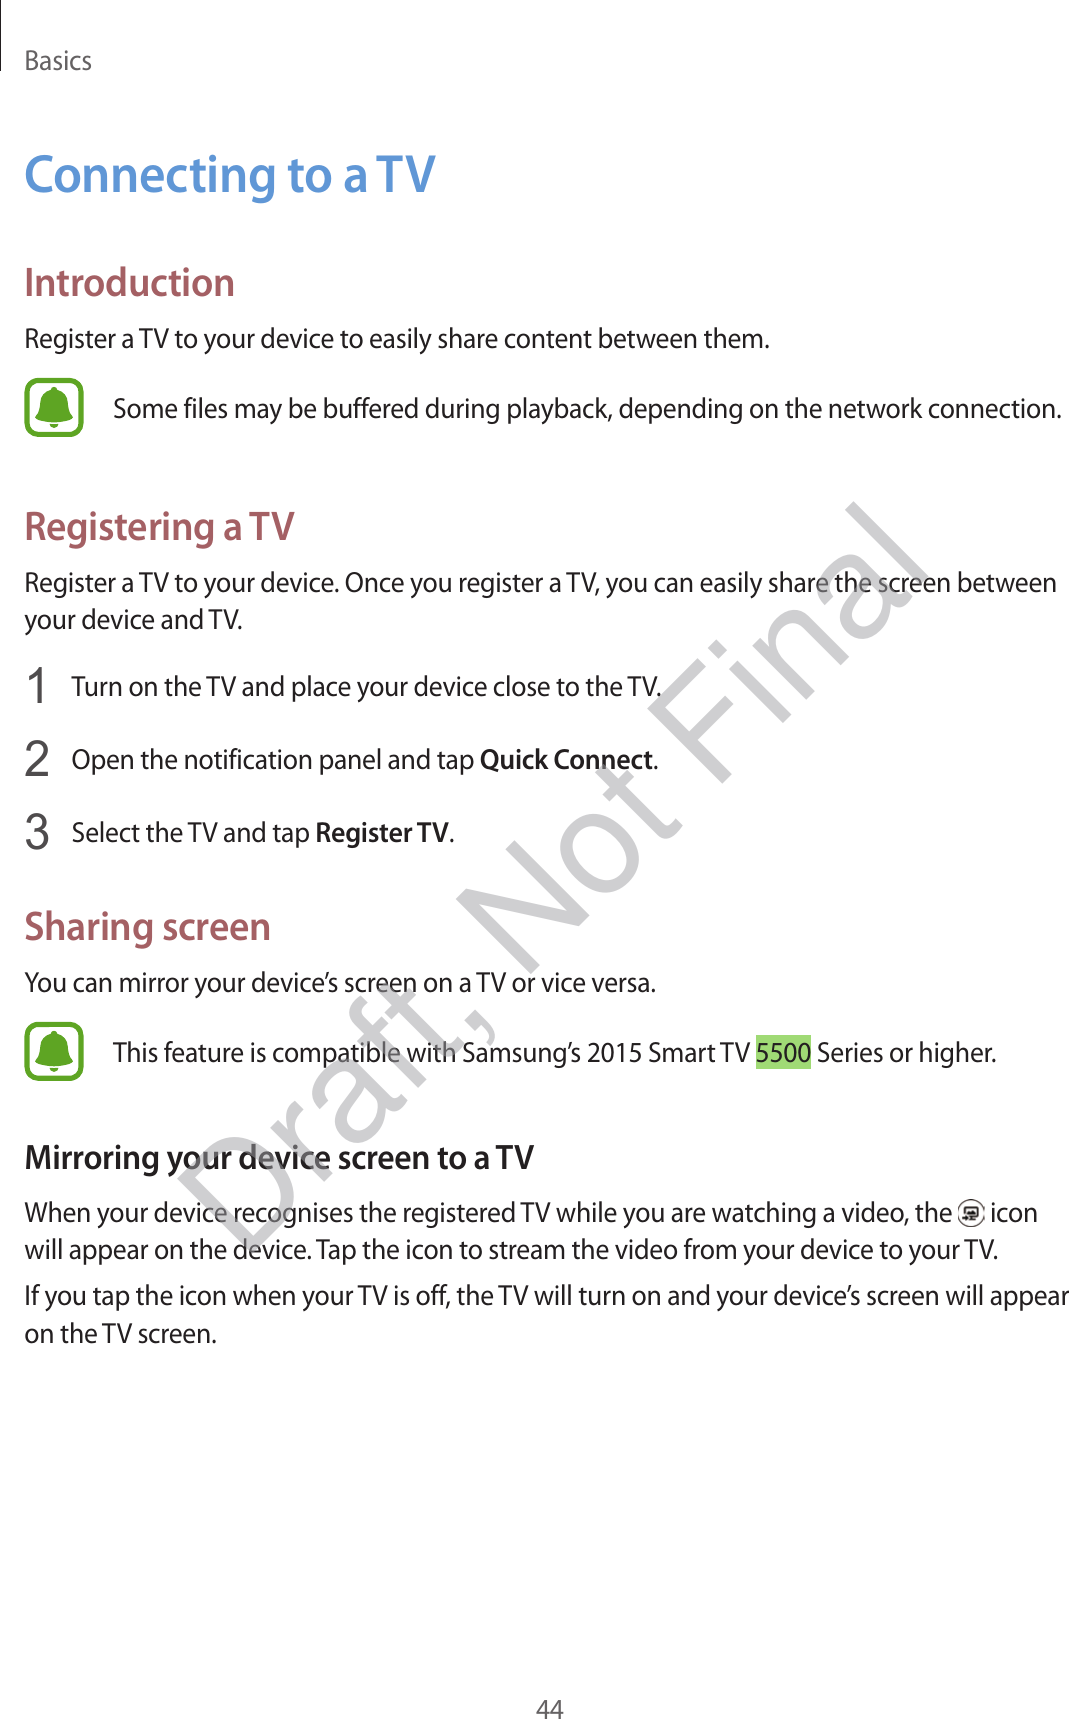 Basics44Connecting to a TVIntroductionRegister a TV to your device to easily share content between them.Some files may be buffered during playback, depending on the network connection.Registering a TVRegister a TV to your device. Once you register a TV, you can easily share the screen between your device and TV.1  Turn on the TV and place your device close to the TV.2  Open the notification panel and tap Quick Connect.3  Select the TV and tap Register TV.Sharing screenYou can mirror your device’s screen on a TV or vice versa.This feature is compatible with Samsung’s 2015 Smart TV 5500 Series or higher.Mirroring your device screen to a TVWhen your device recognises the registered TV while you are watching a video, the   icon will appear on the device. Tap the icon to stream the video from your device to your TV.If you tap the icon when your TV is off, the TV will turn on and your device’s screen will appear on the TV screen.Draft, Not Final